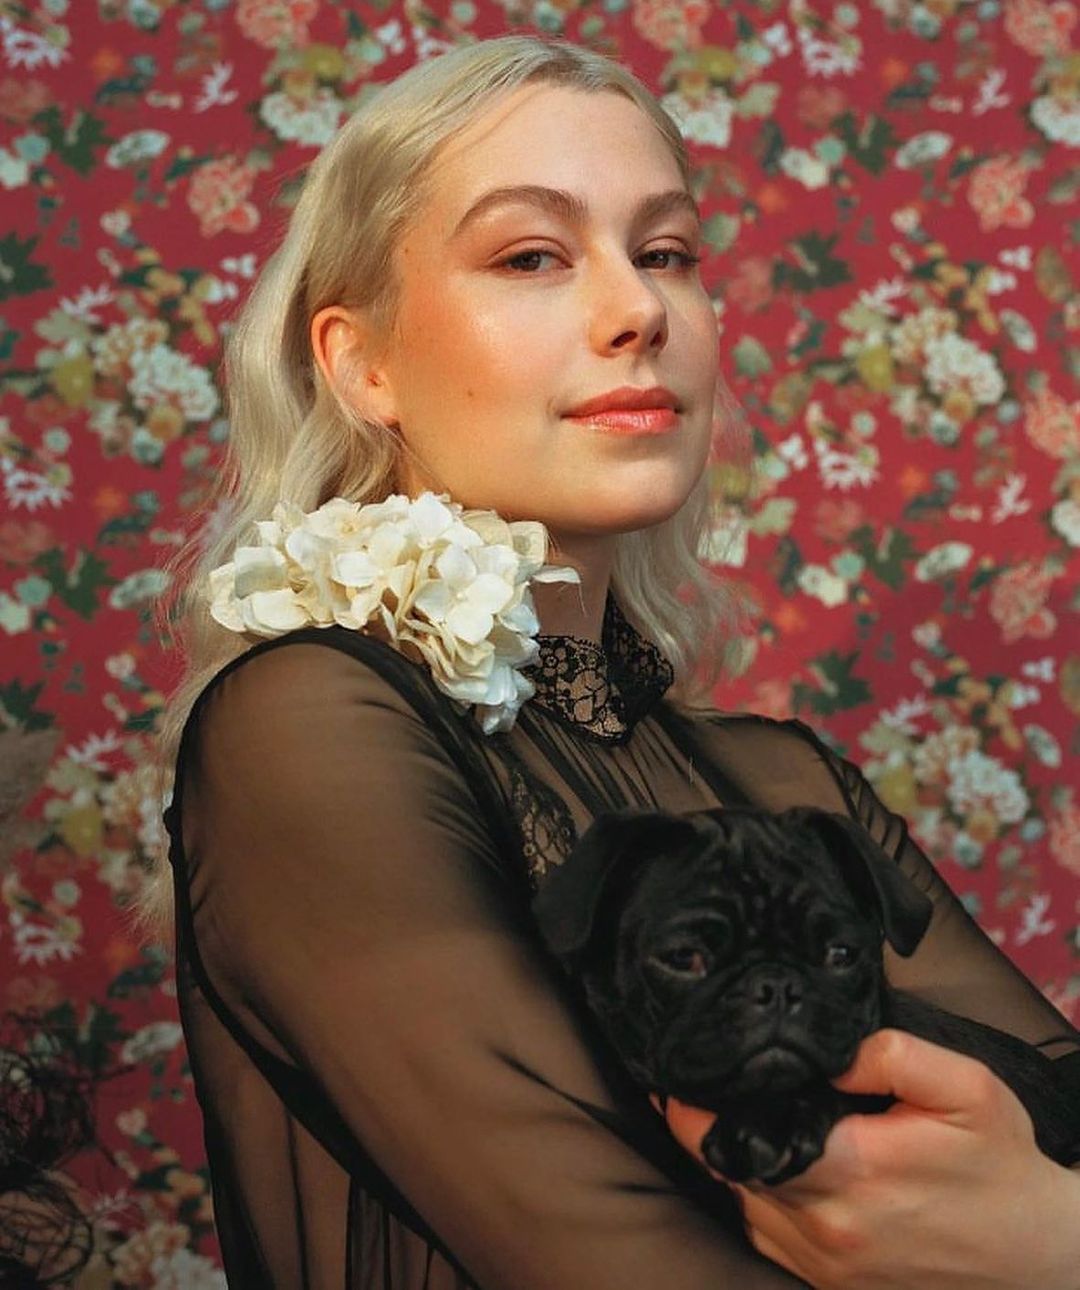 PHOEBE BRIDGERS West Age, Height, Wife, Family – Biographyprofiles